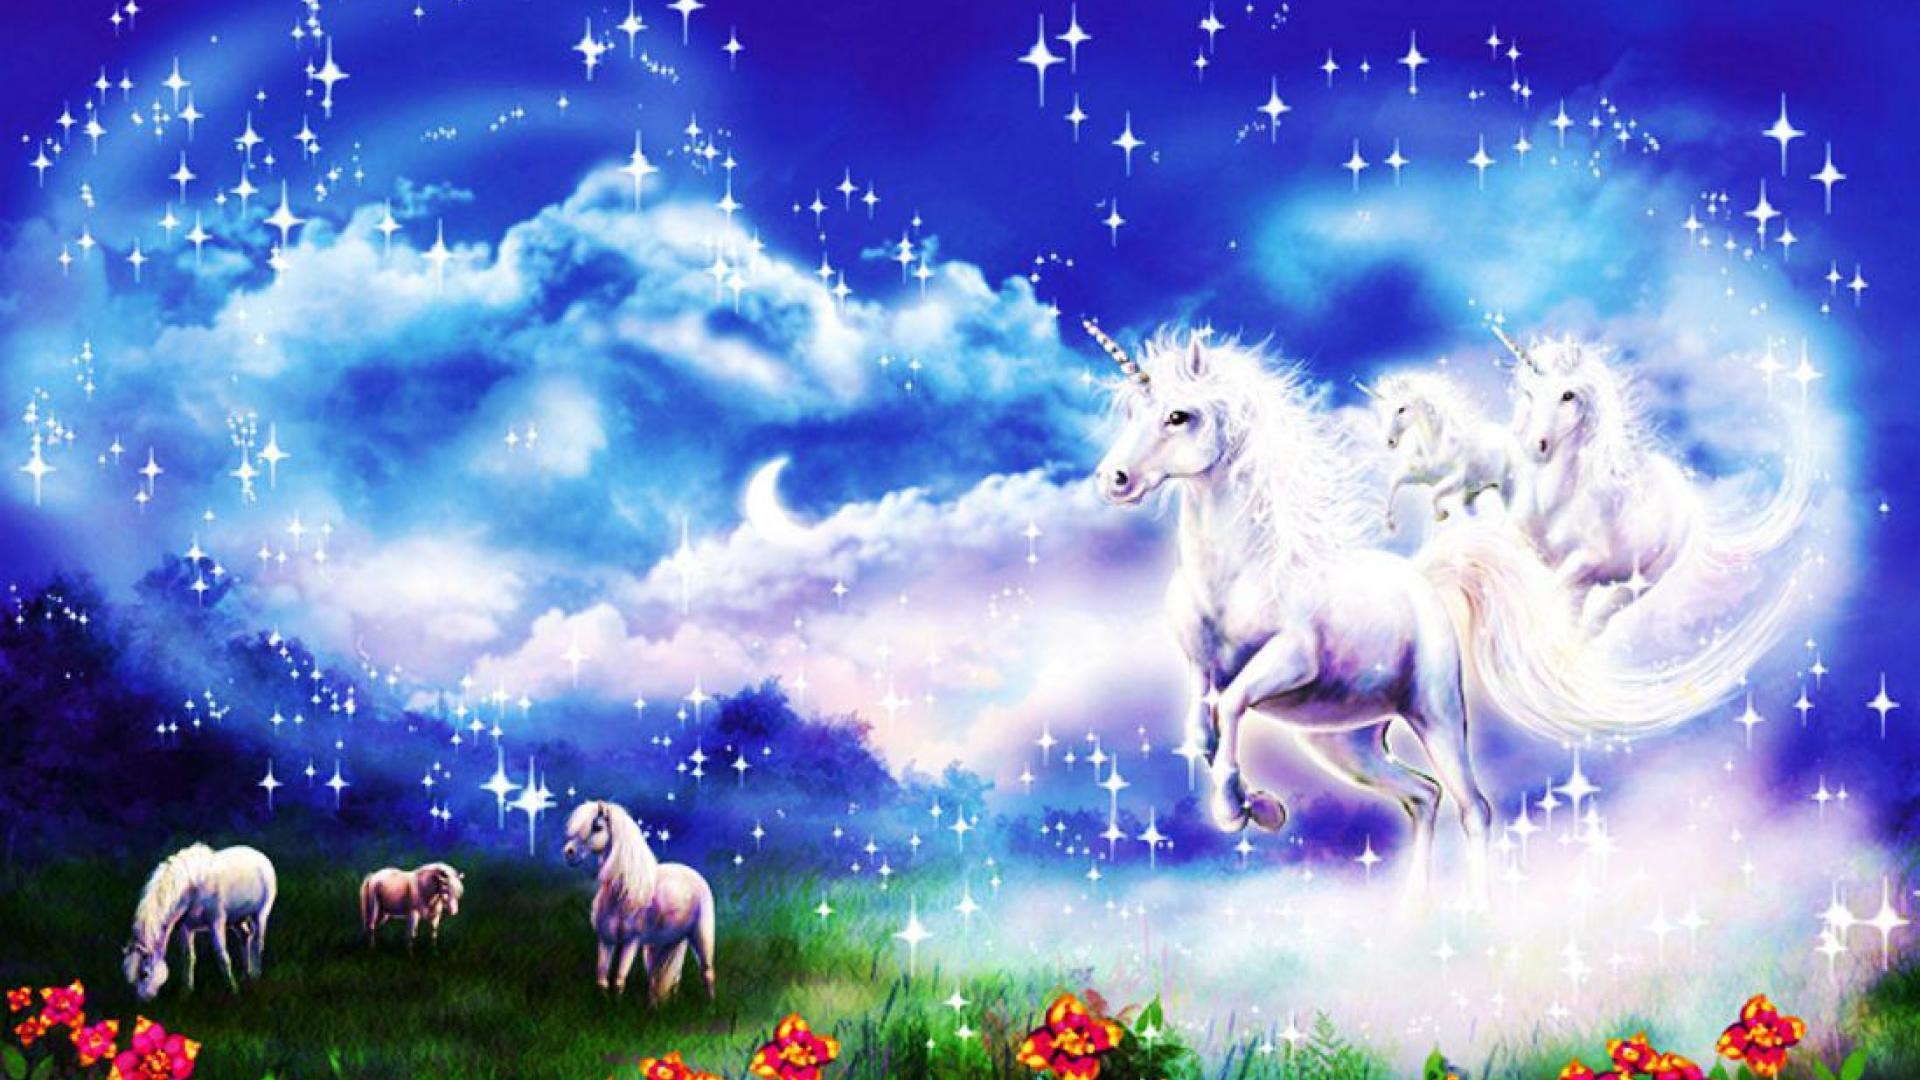 1920x1080 Spirit of unicorn - (#141404) - High Quality and Resolution Wallpapers .